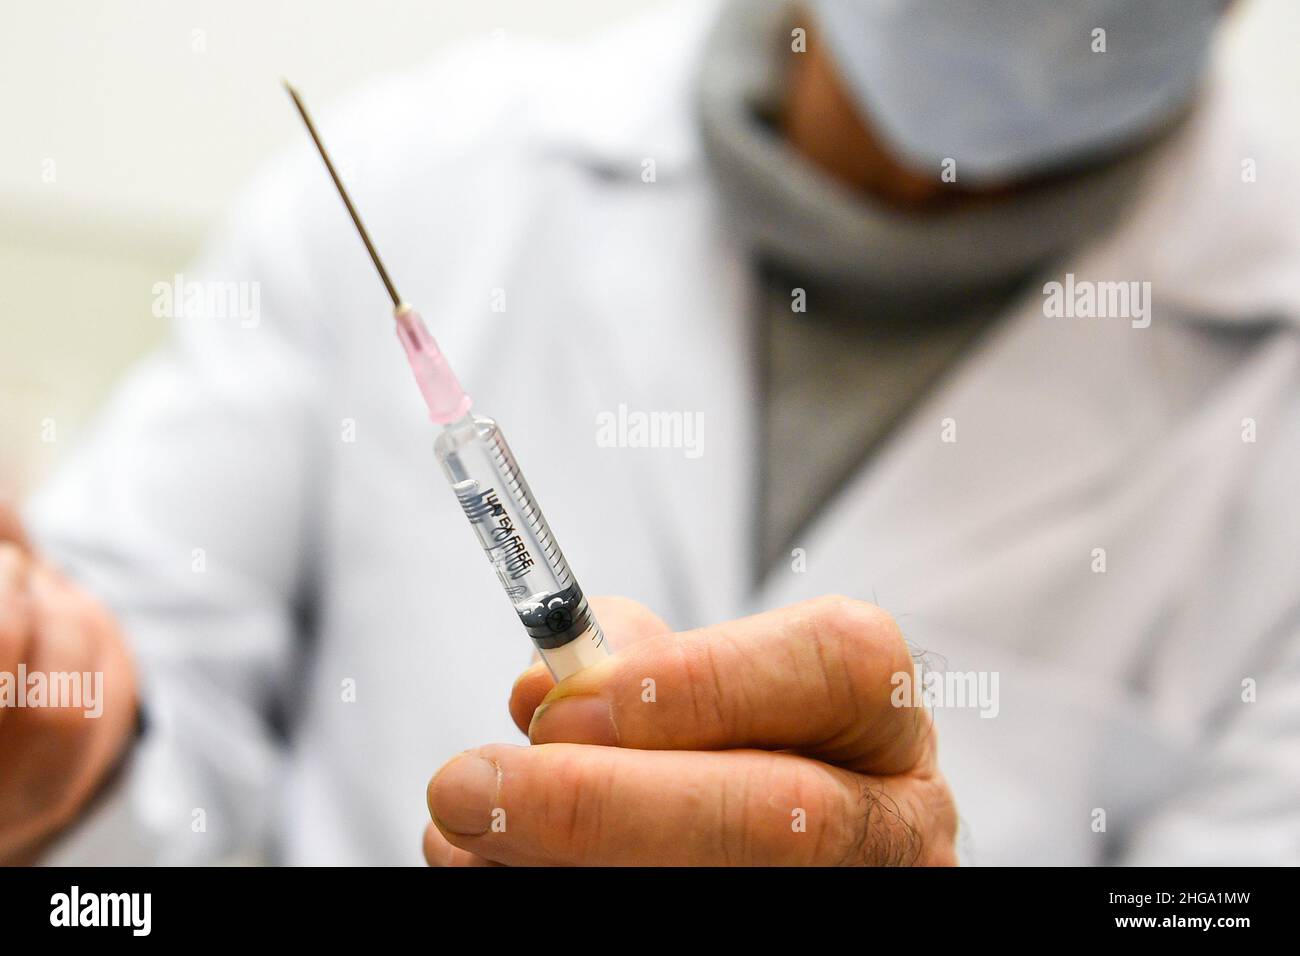 Illustration picture shows a general practitioner practicing vaccination in his office, holds a syringe with the vaccine, before vaccinate a patient r Stock Photo